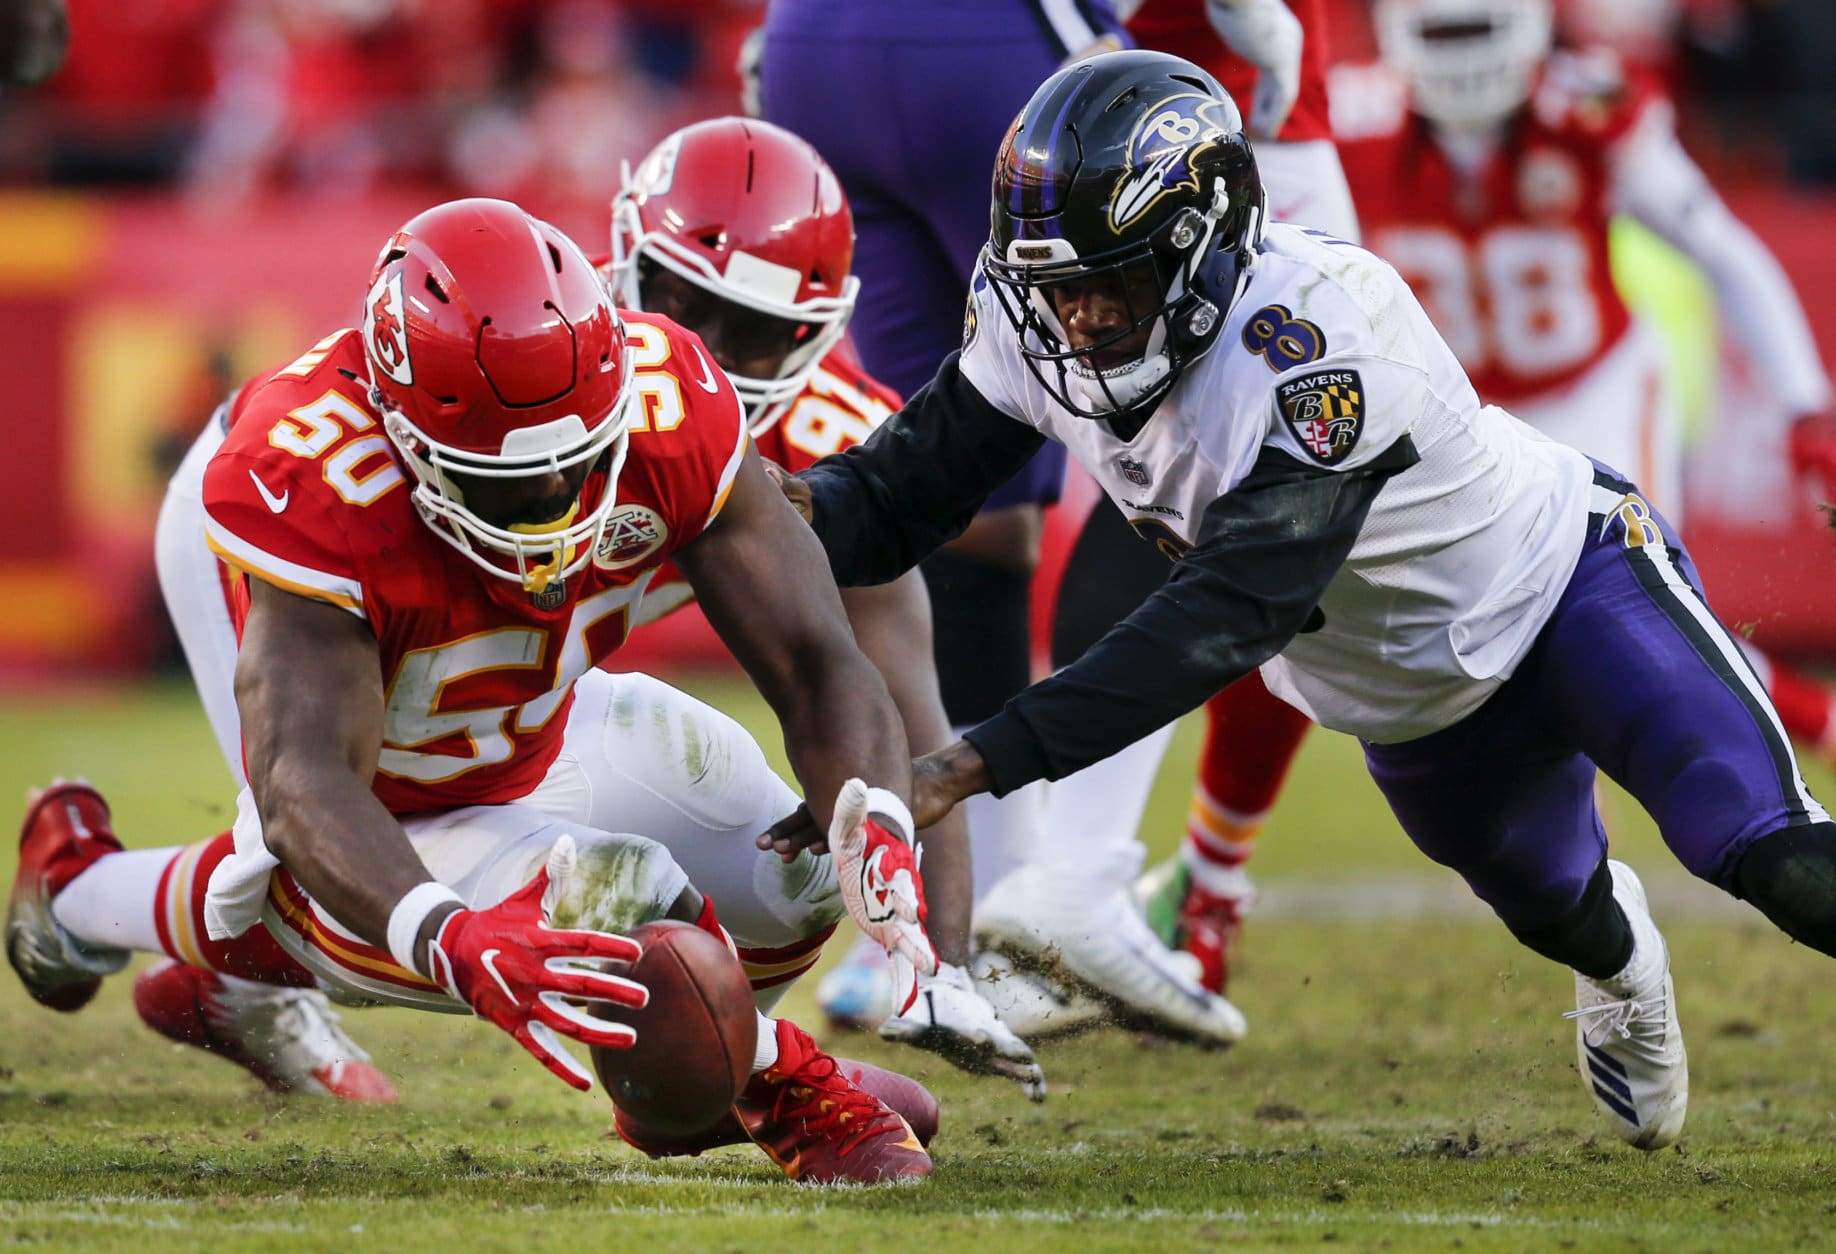 KANSAS CITY, MO - DECEMBER 09: Outside linebacker Justin Houston #50 of the Kansas City Chiefs strips the football from quarterback Lamar Jackson #8 of the Baltimore Ravens late in the fourth quarter at Arrowhead Stadium on December 9, 2018 in Kansas City, Missouri. The Chiefs won in overtime, 27-24. (Photo by David Eulitt/Getty Images)